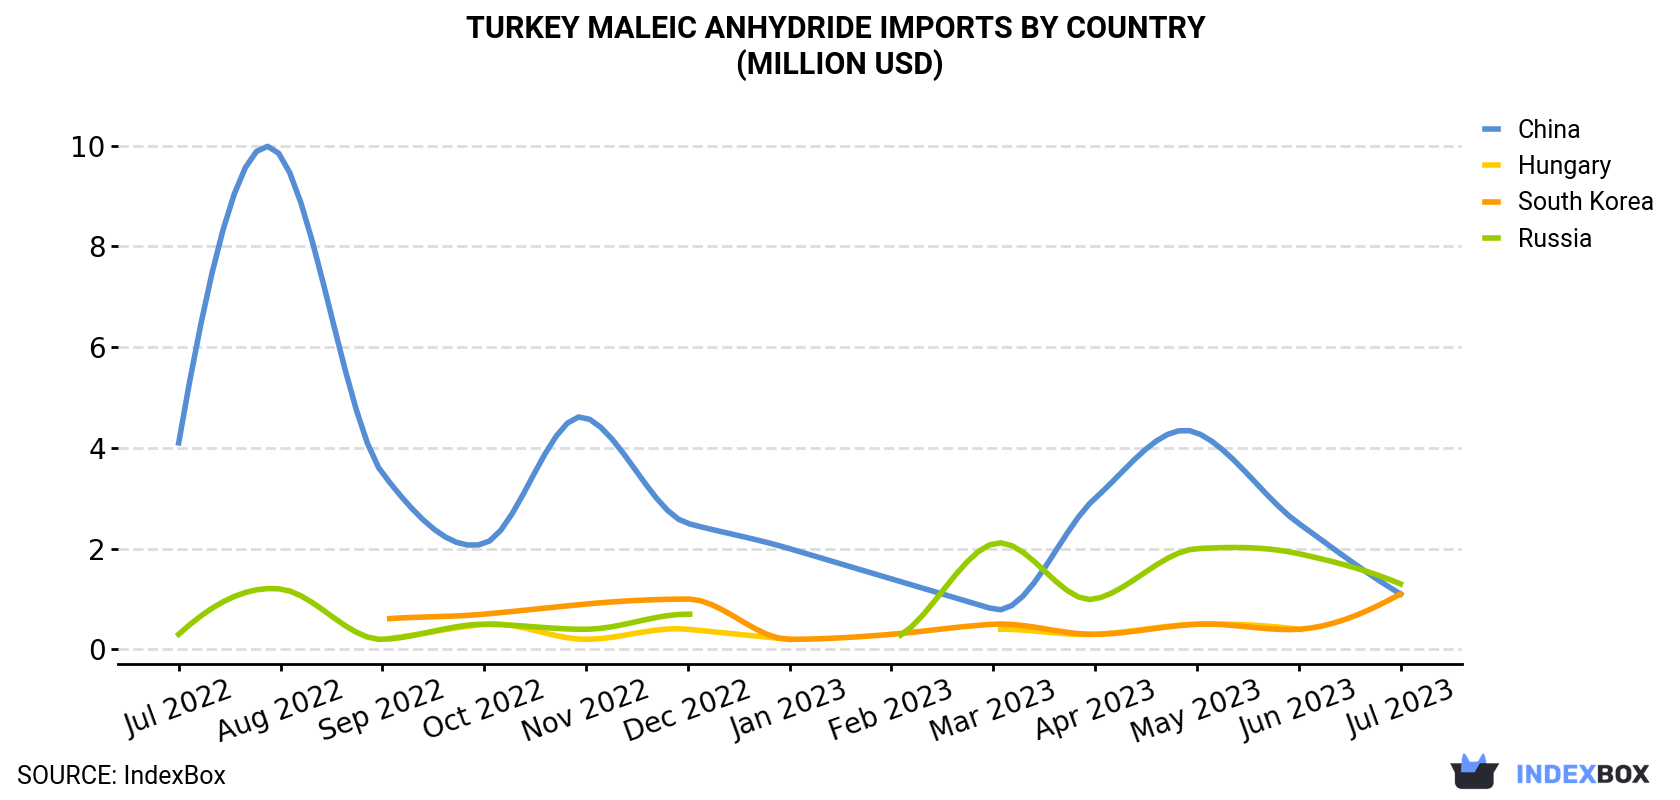 Turkey Maleic Anhydride Imports By Country (Million USD)